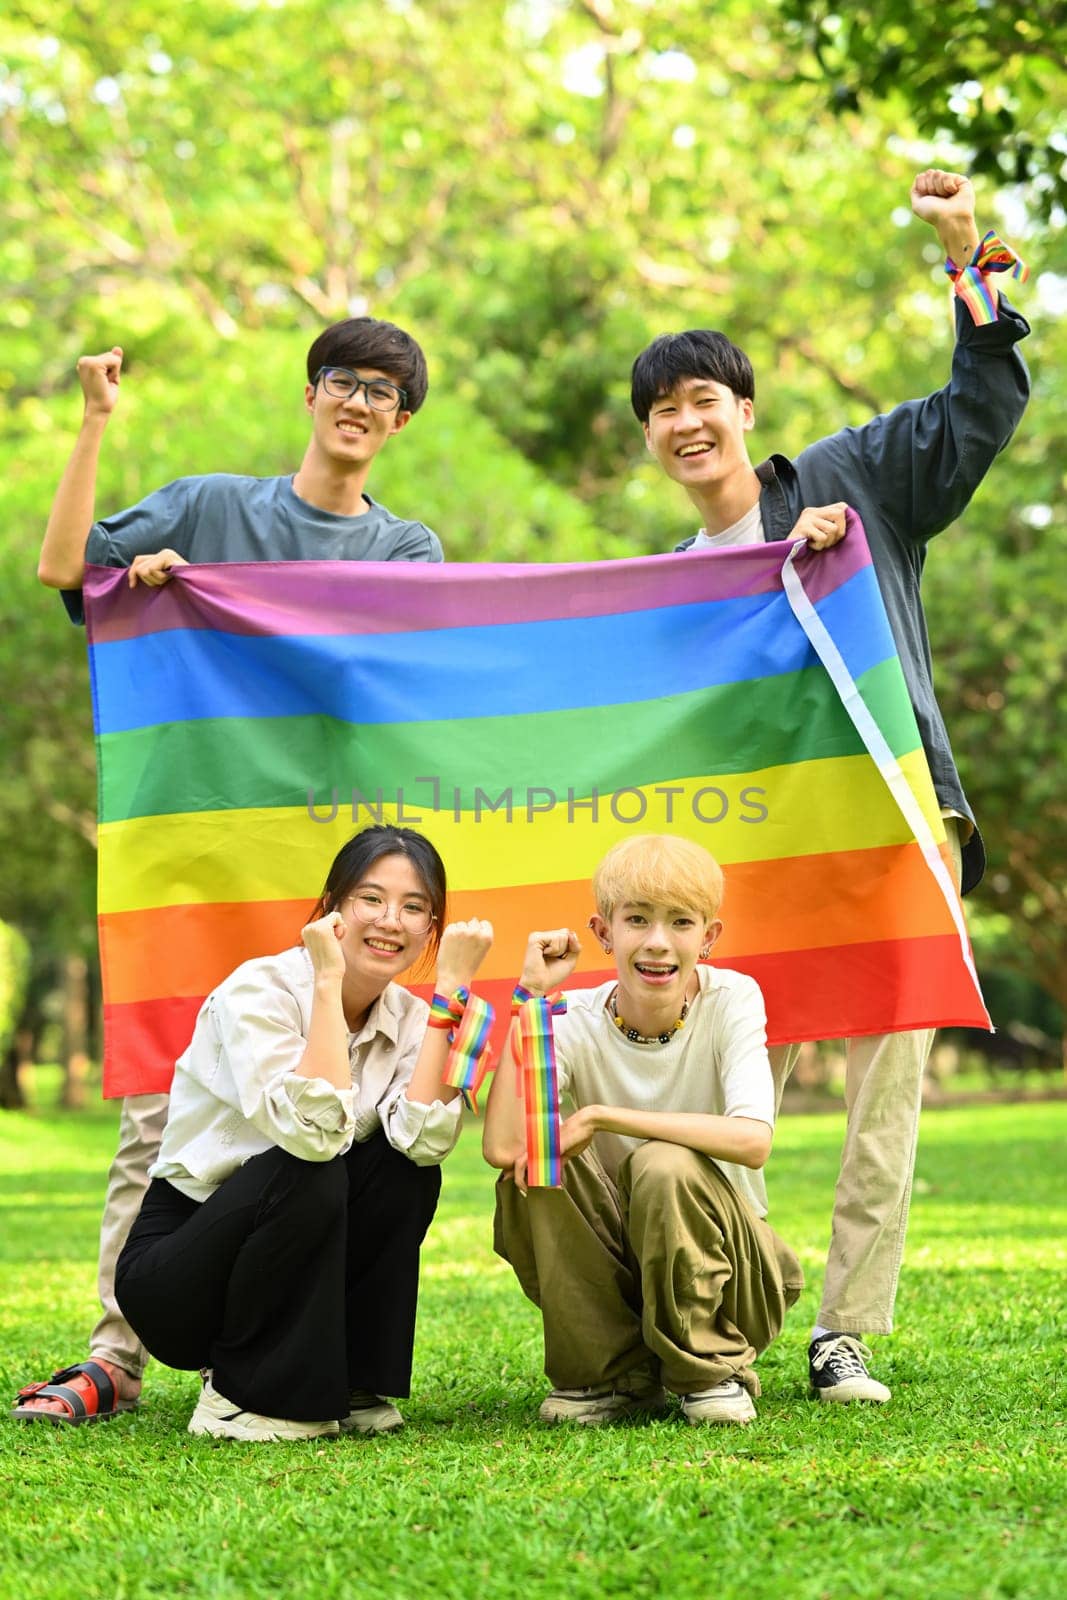 LGBTQ community, freedom, solidarity and equal rights. Image of young people with LGBTQ pride flag, standing in public park.